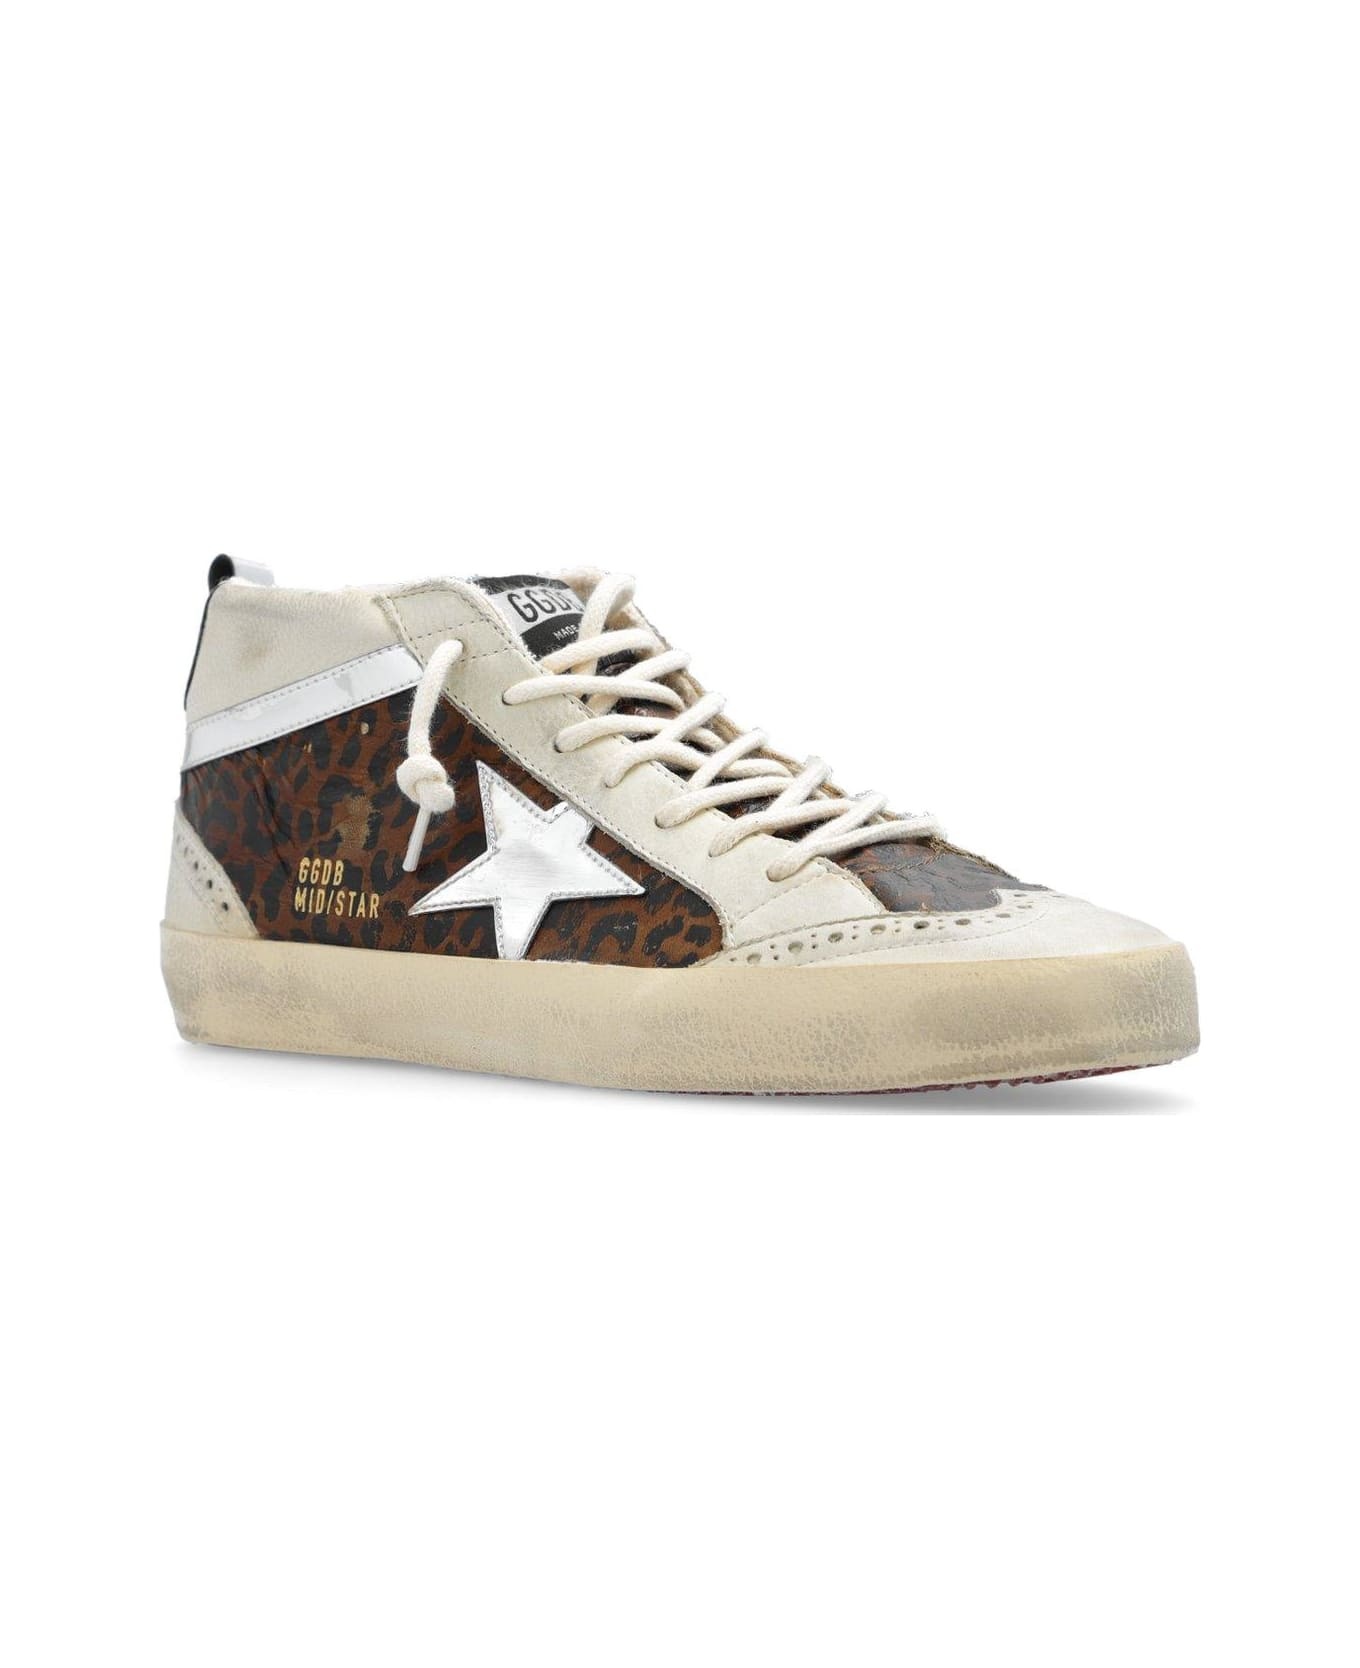 Mid-star Double Quarter Sneakers - 2